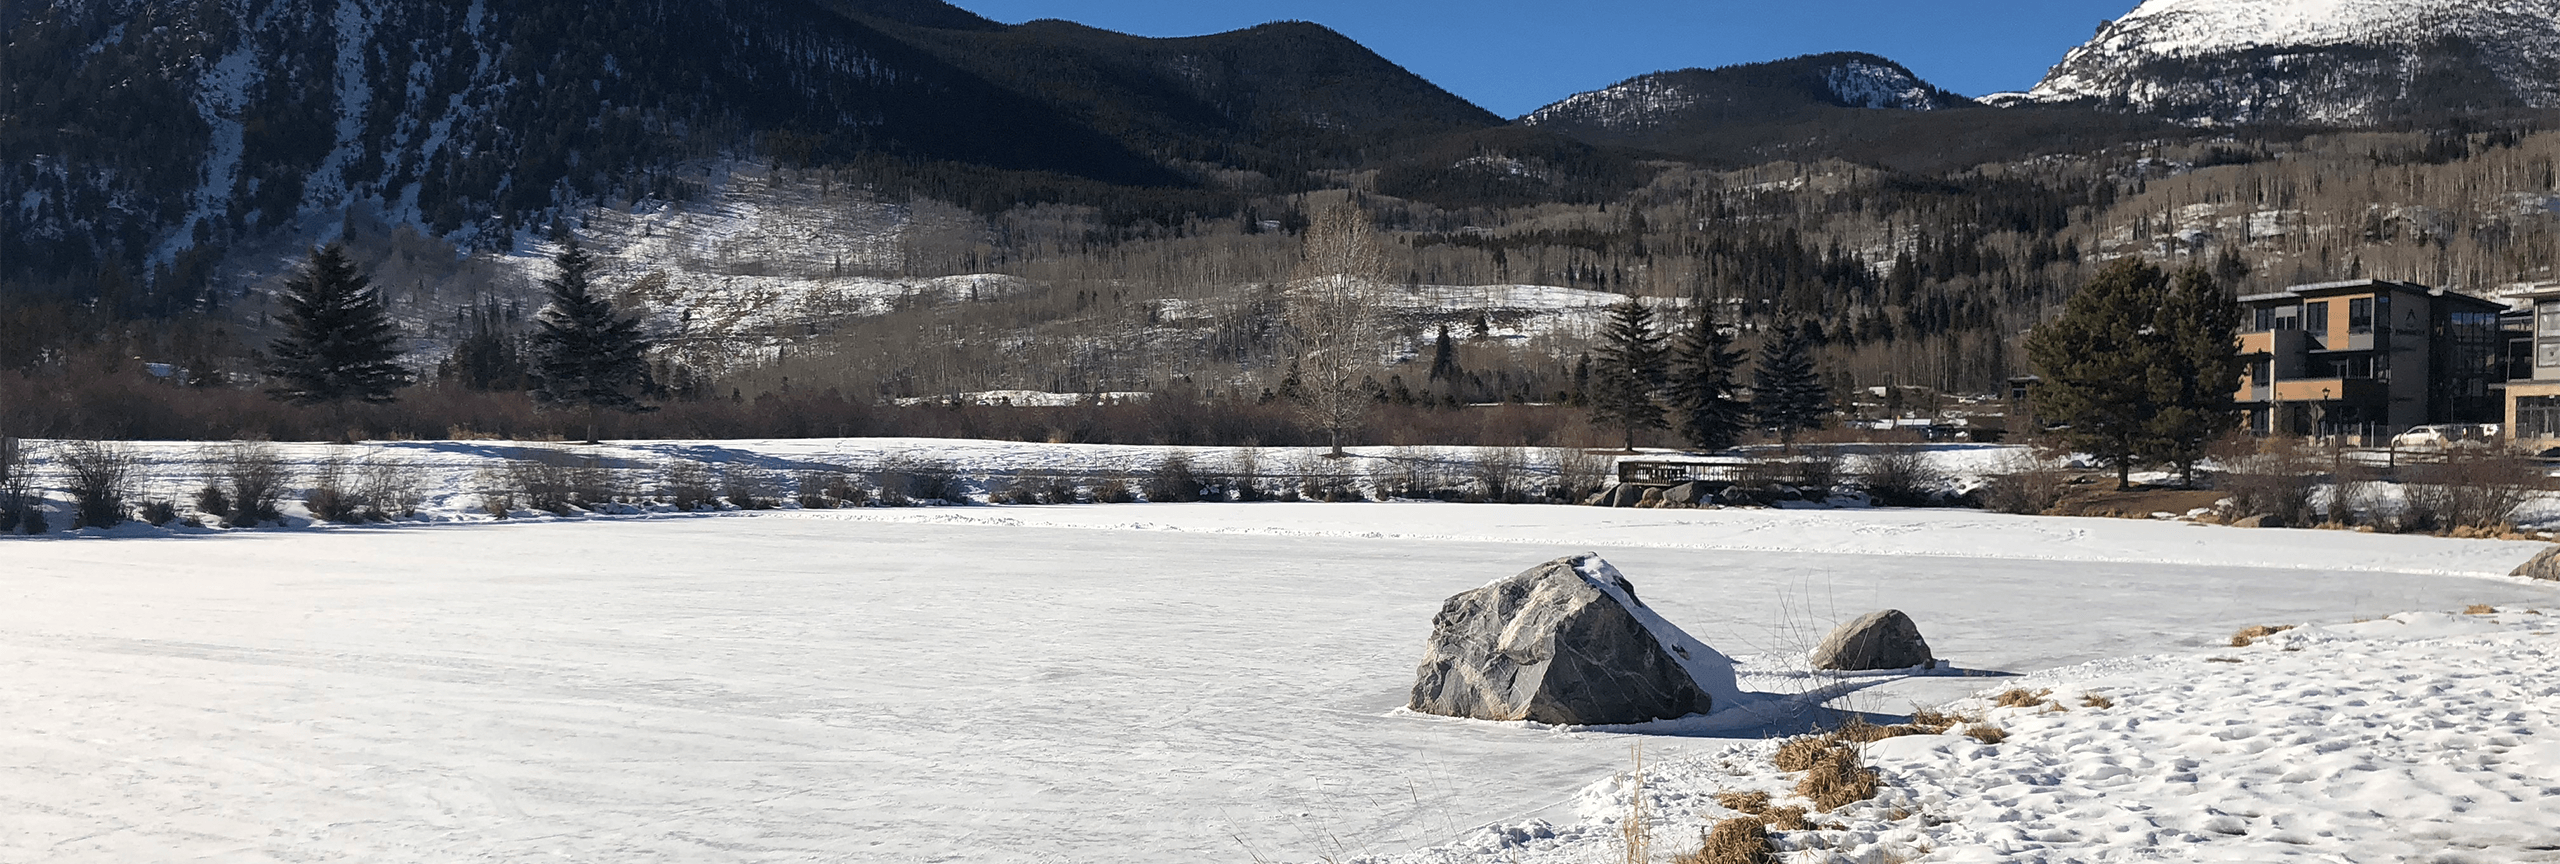 Meadow Creek pond ready for ice skating